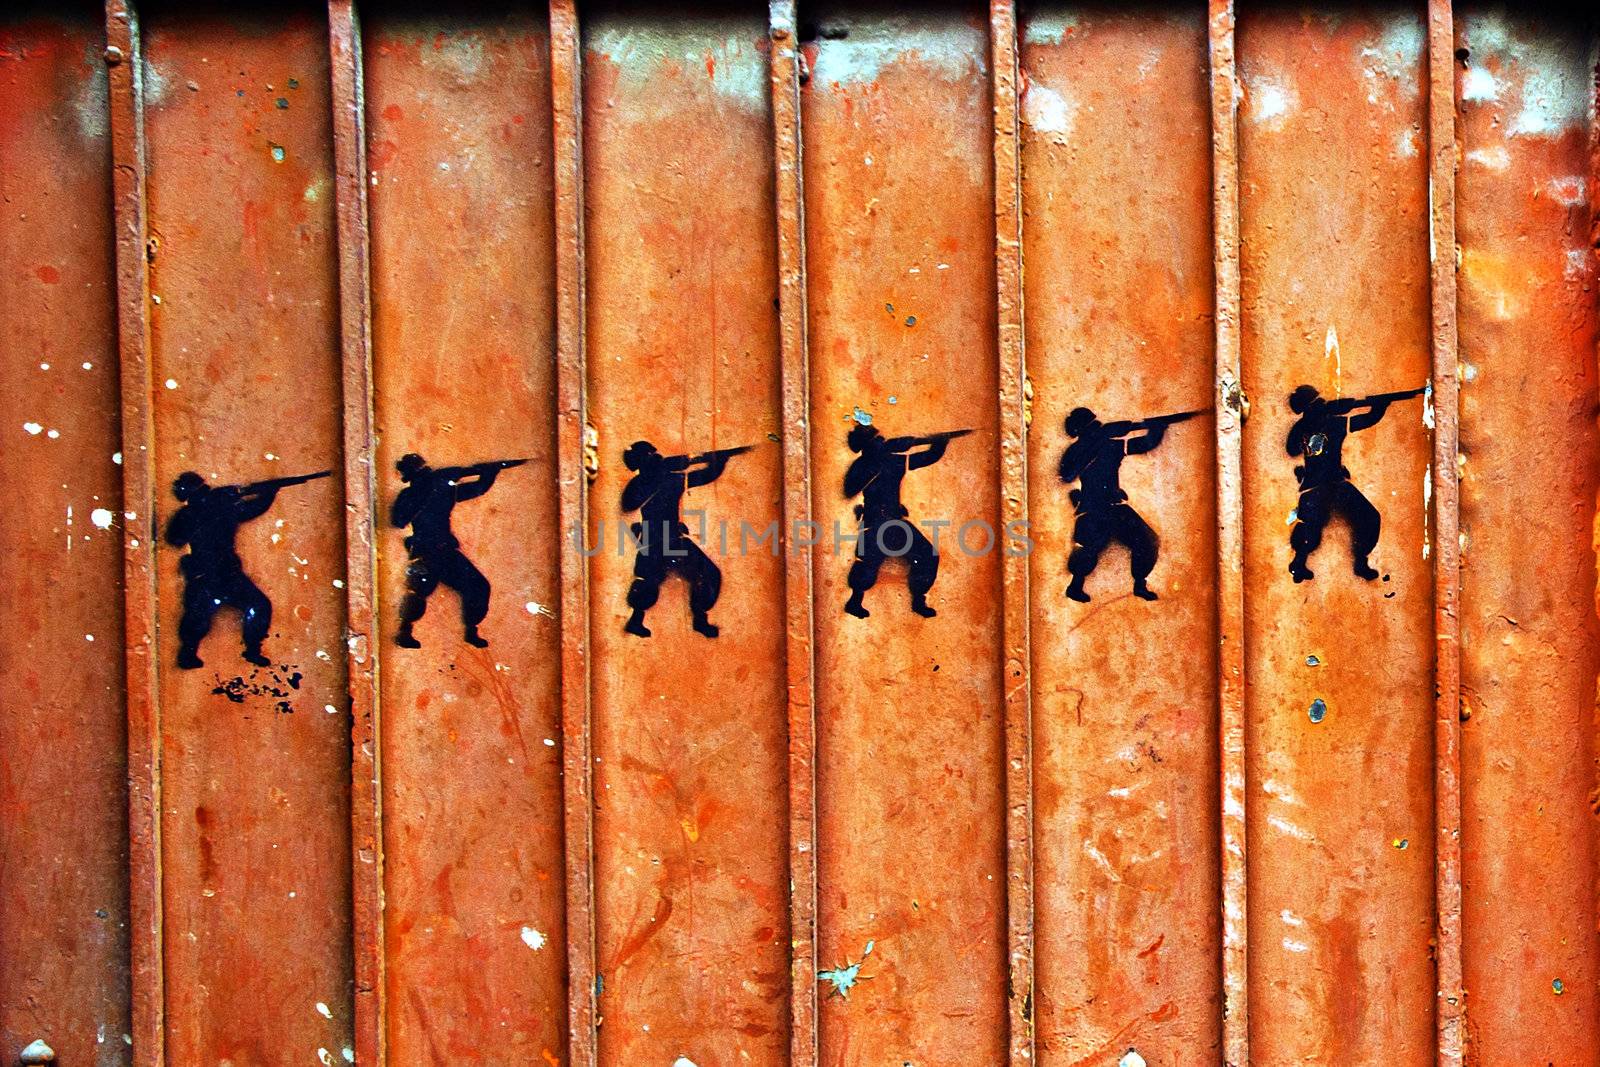 Graffiti of soldiers with guns on an old metal door.